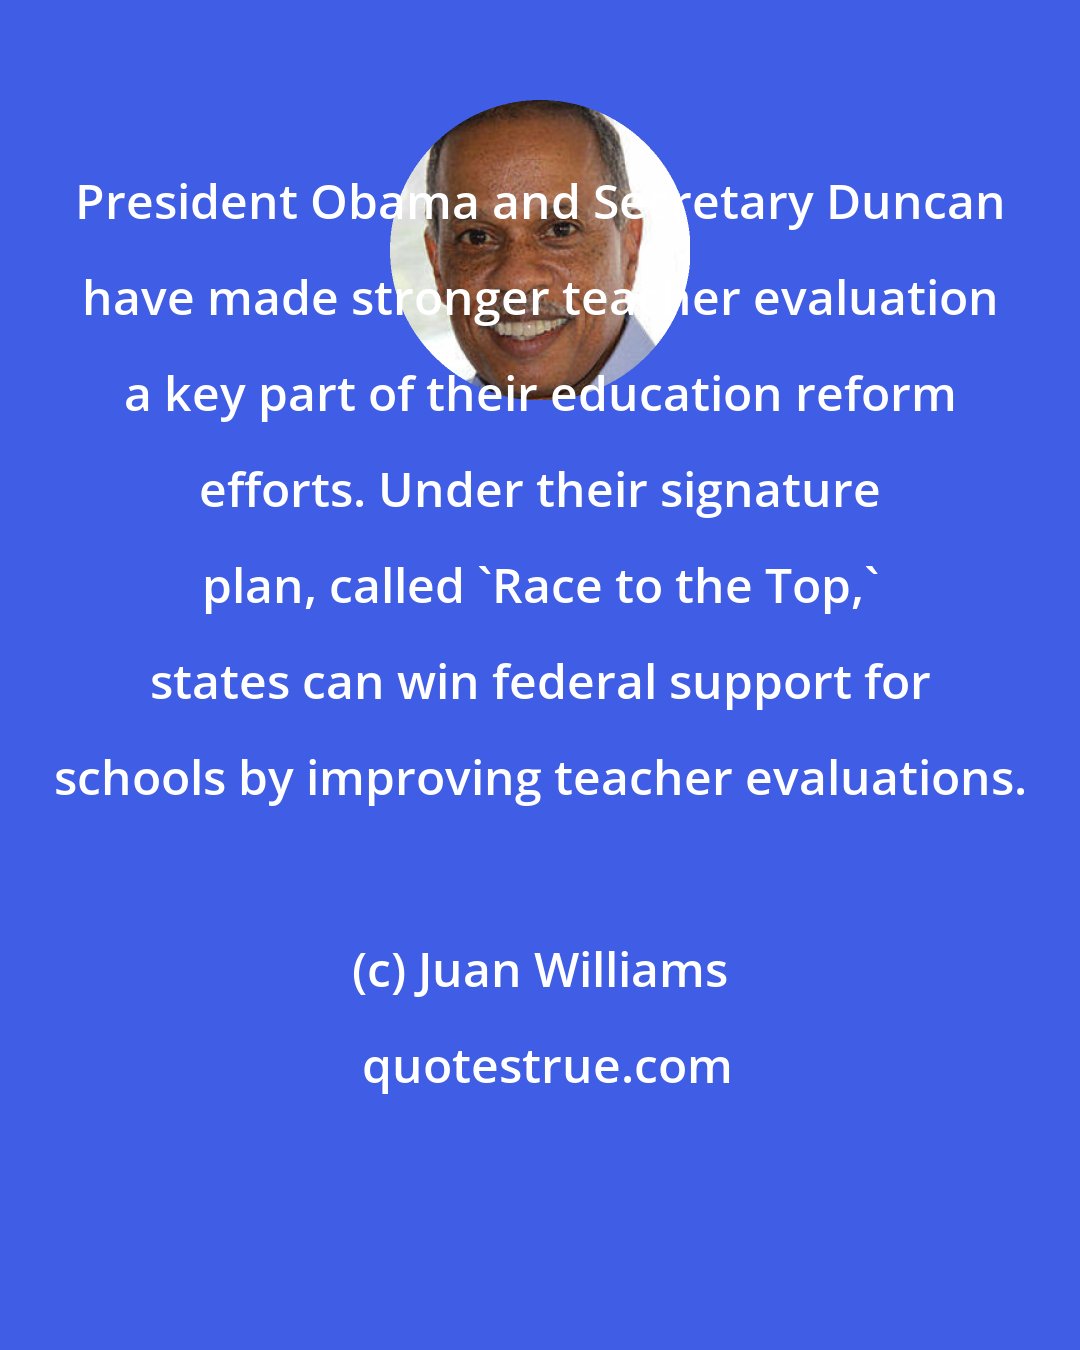 Juan Williams: President Obama and Secretary Duncan have made stronger teacher evaluation a key part of their education reform efforts. Under their signature plan, called 'Race to the Top,' states can win federal support for schools by improving teacher evaluations.